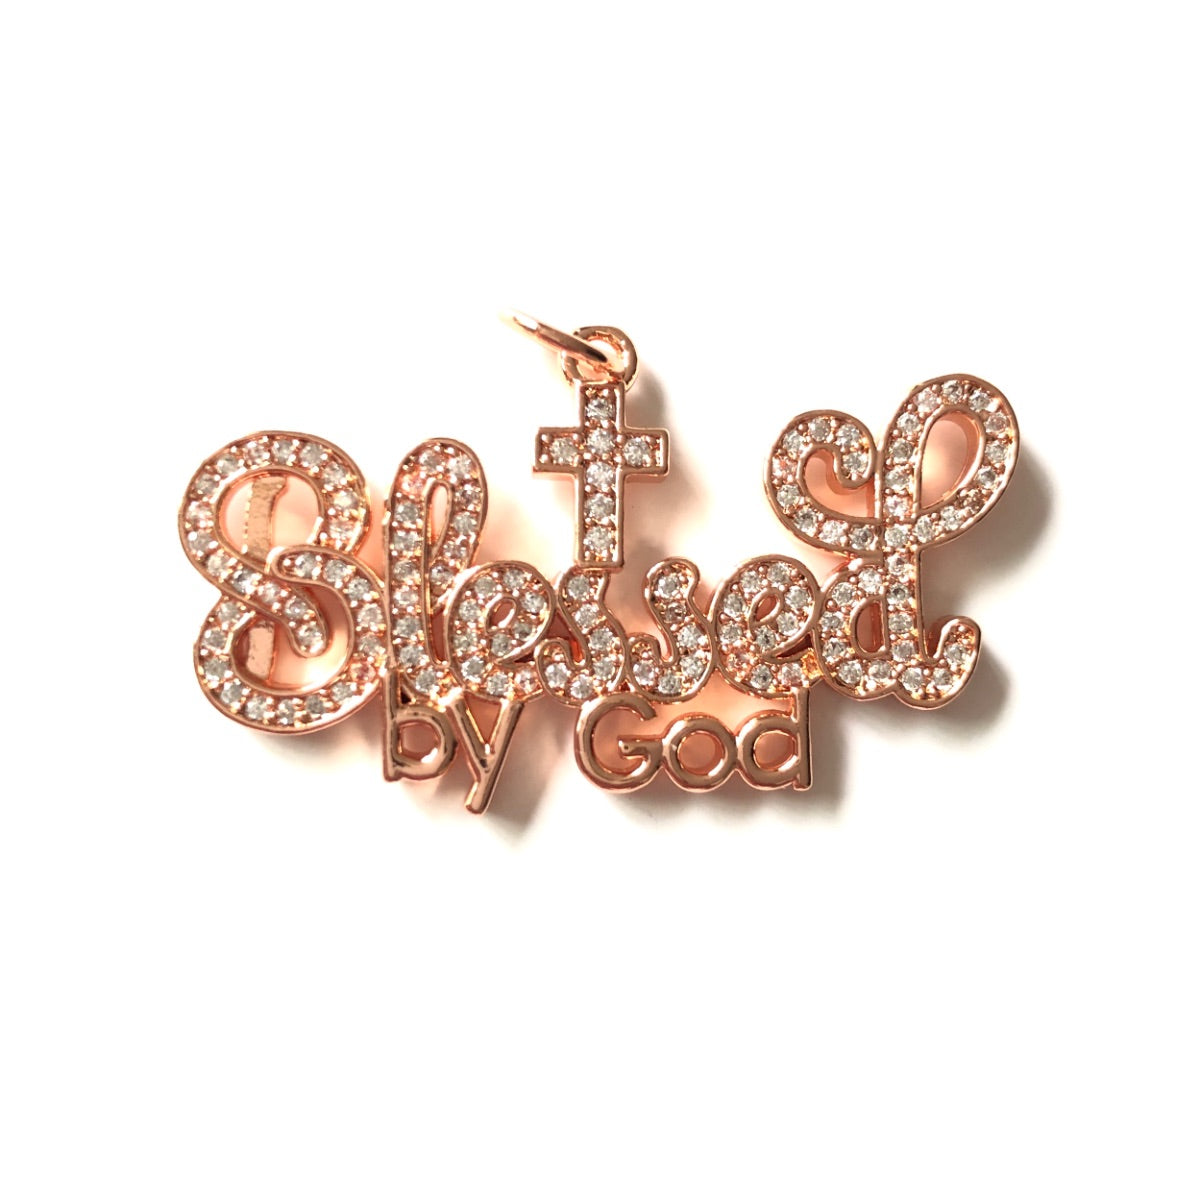 10pcs/lot 38*22mm CZ Paved Blessed By God World Charms Rose Gold CZ Paved Charms Christian Quotes New Charms Arrivals Charms Beads Beyond